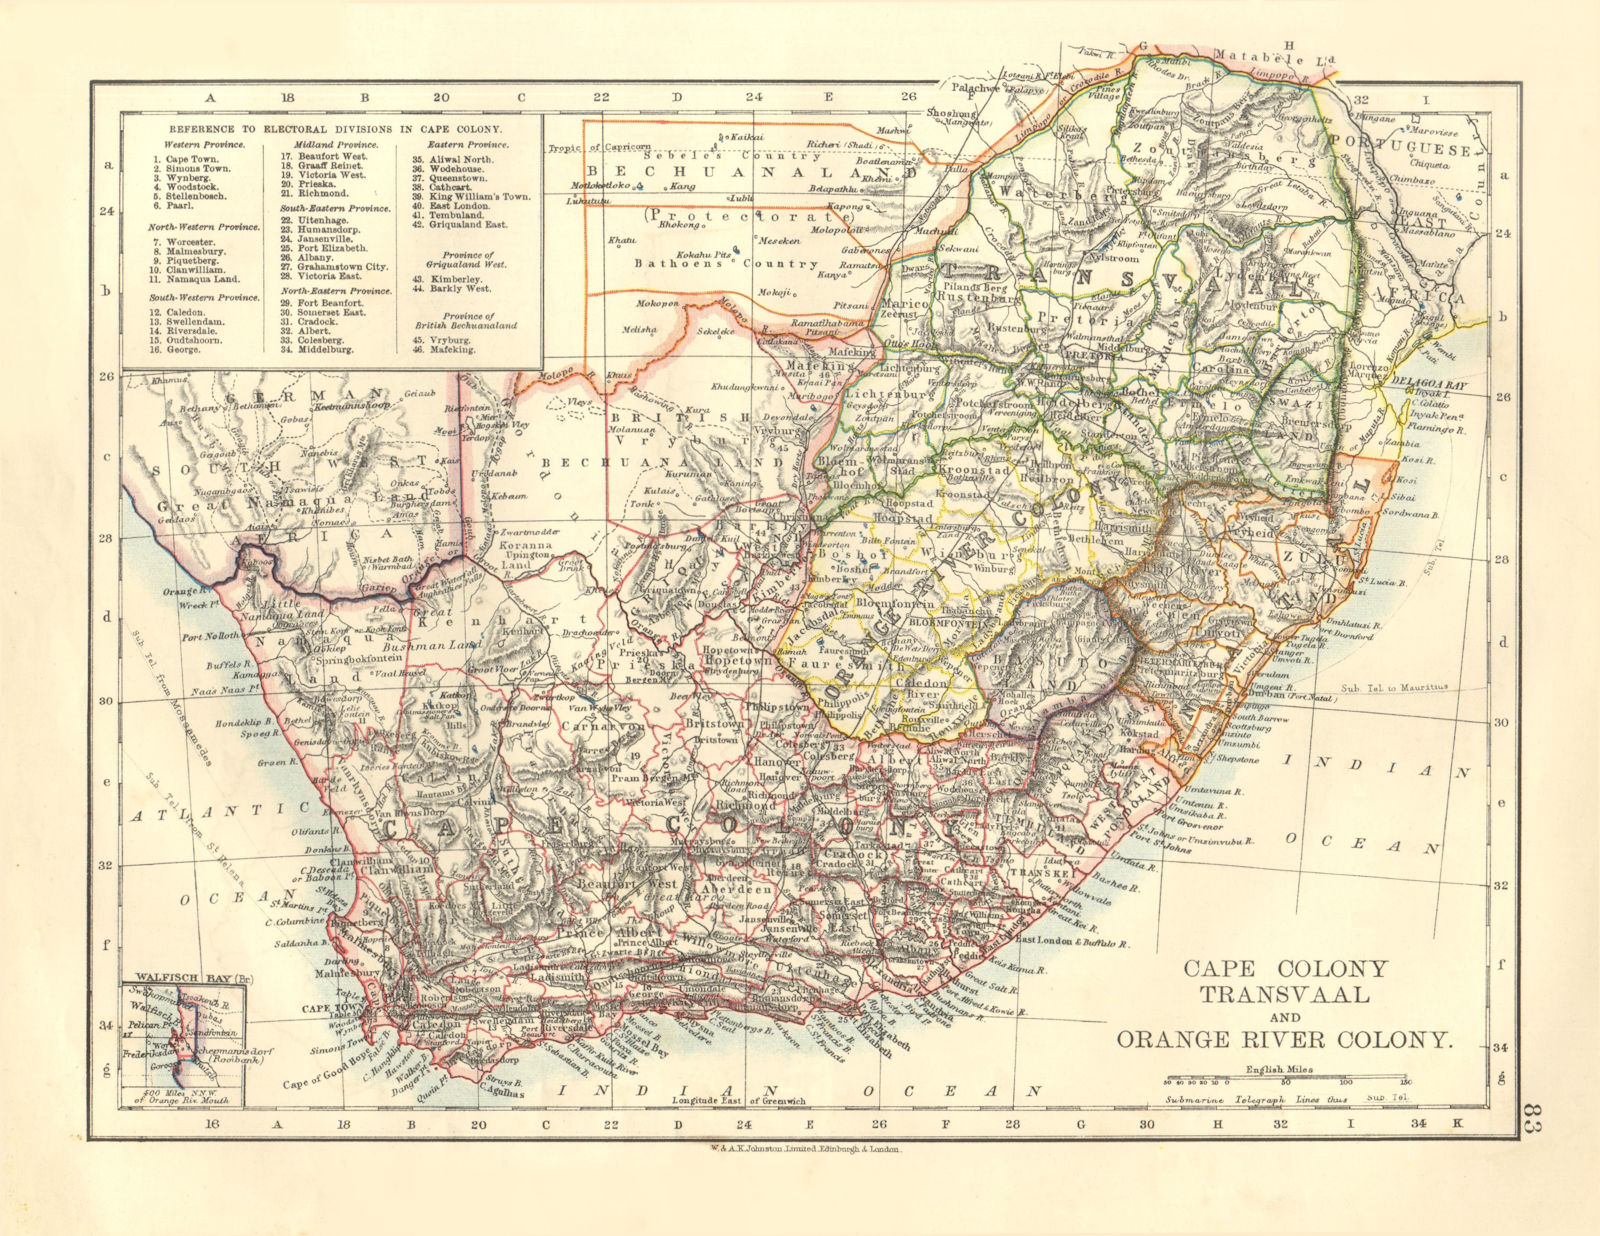 COLONIAL SOUTH AFRICA. Cape Colony. Orange River Colony. Transvaal 1906 map